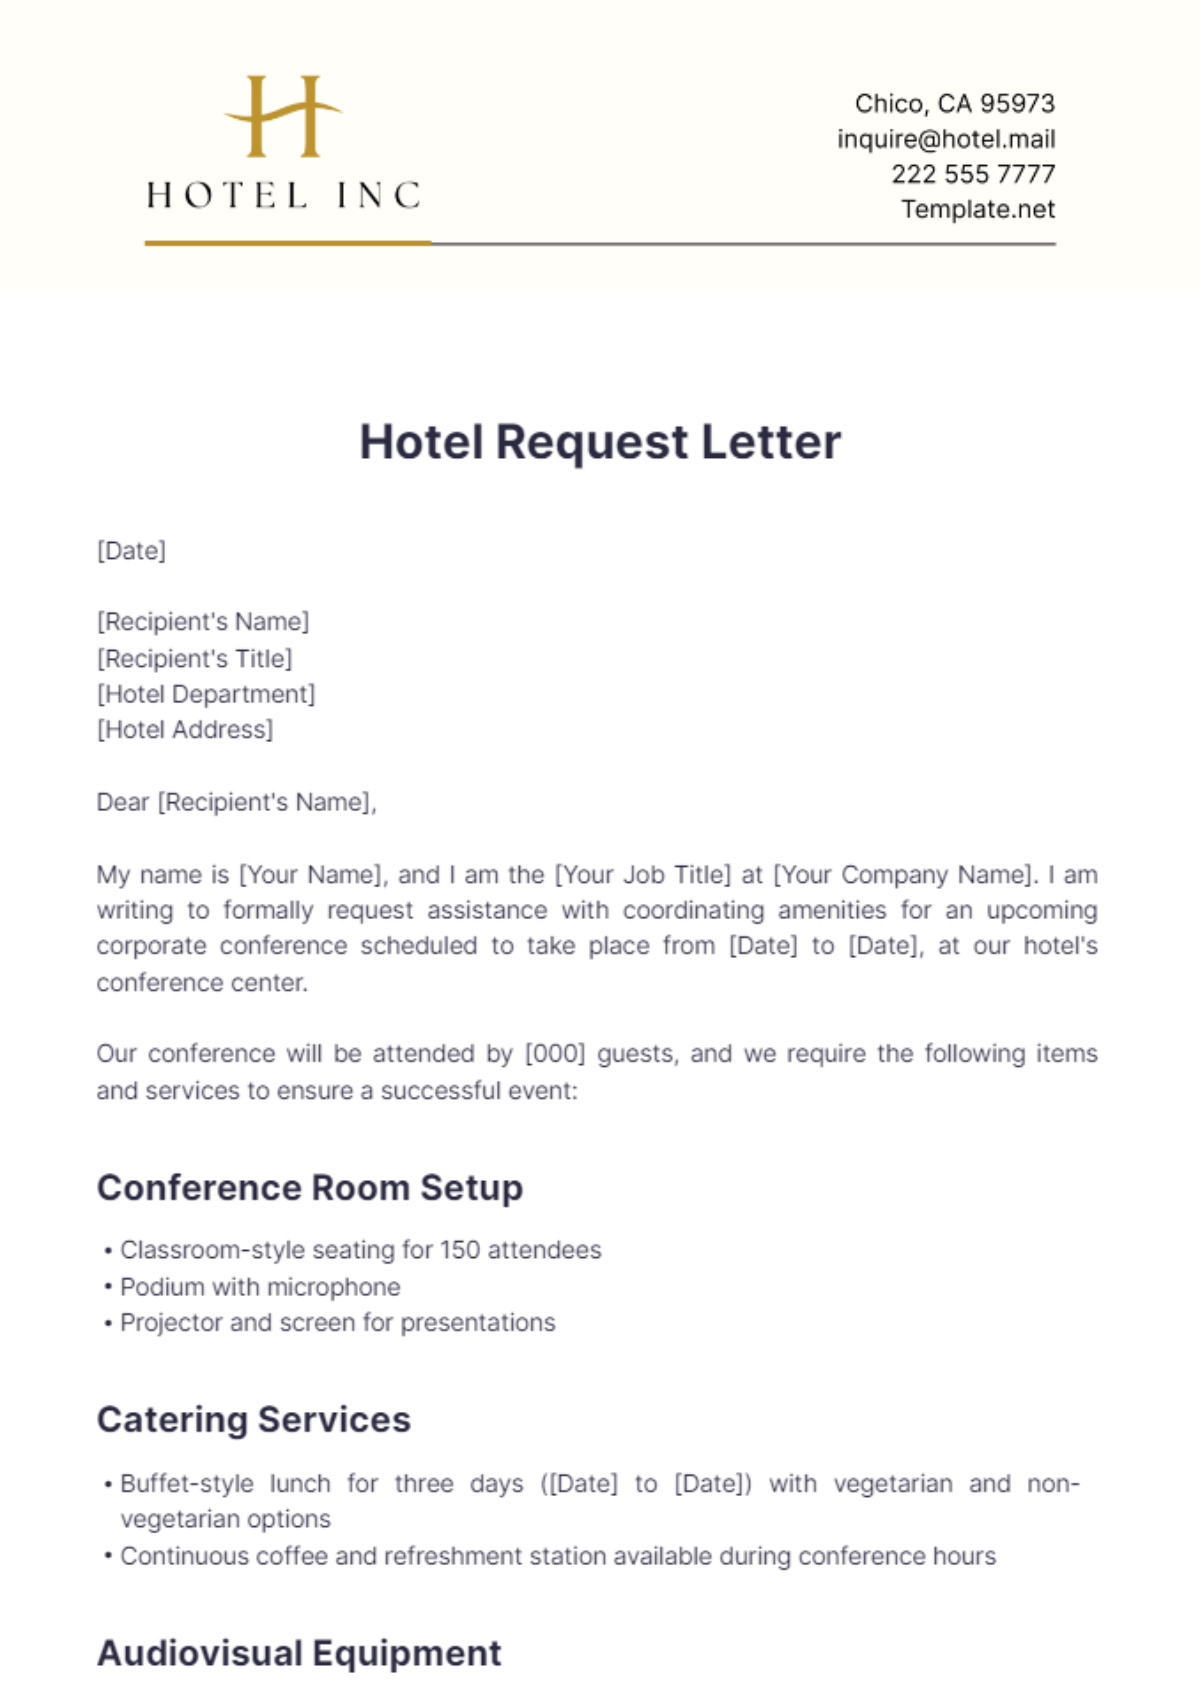 Hotel Request Letter Template